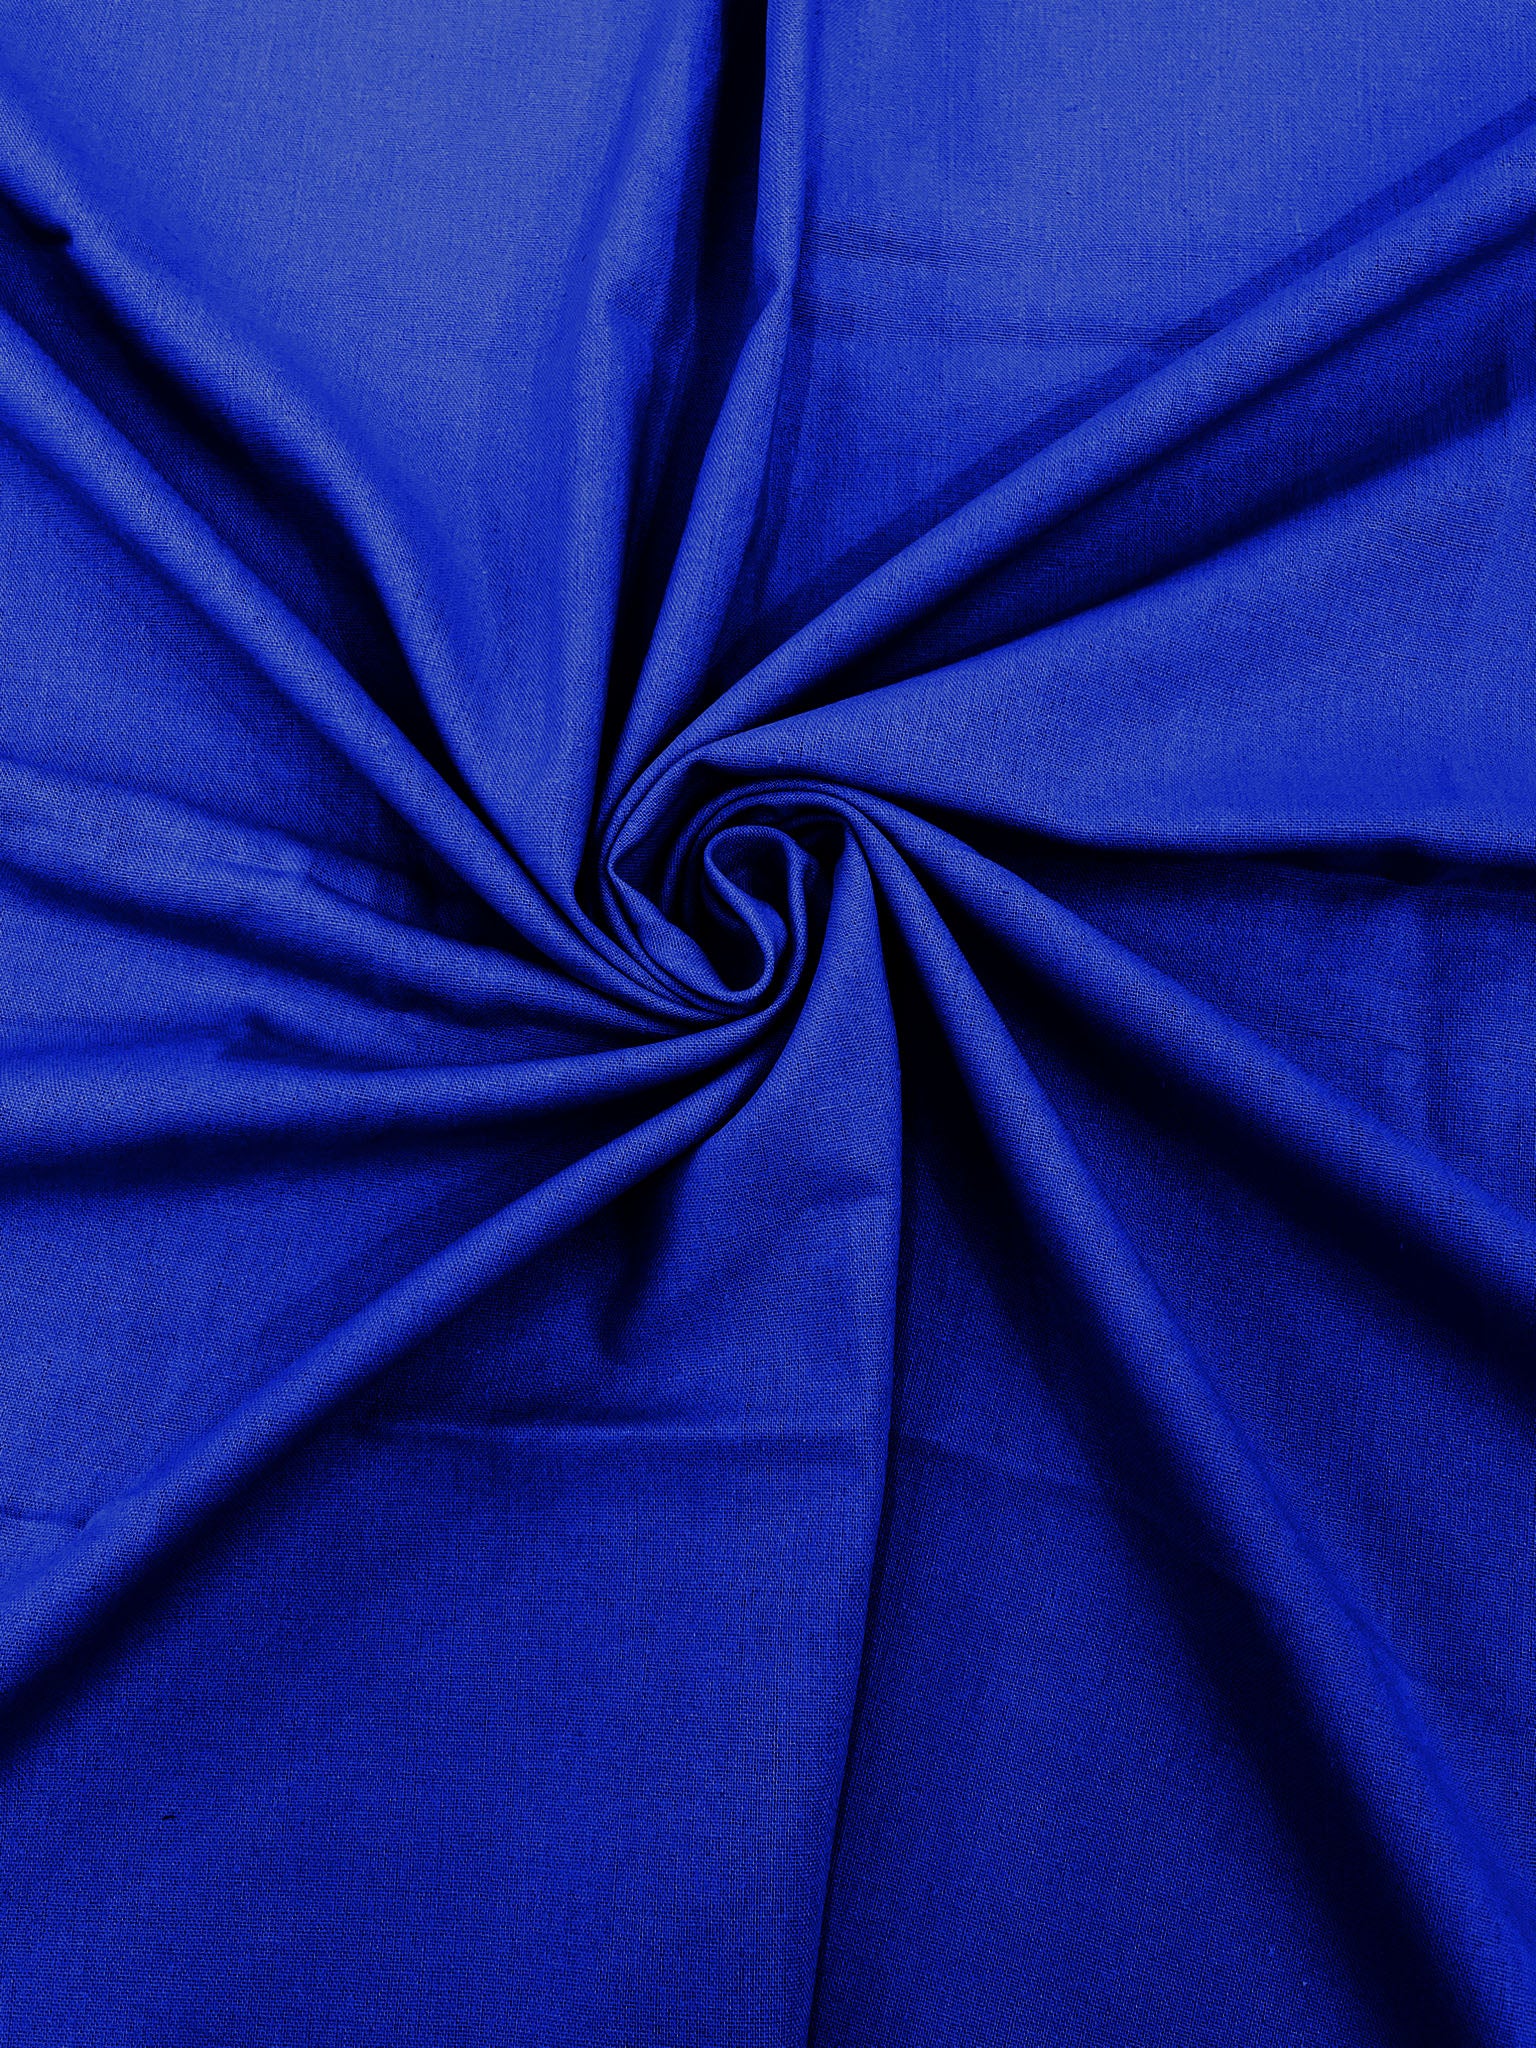 Royal Blue Medium Weight Natural Linen Fabric/50 " Wide/Clothing